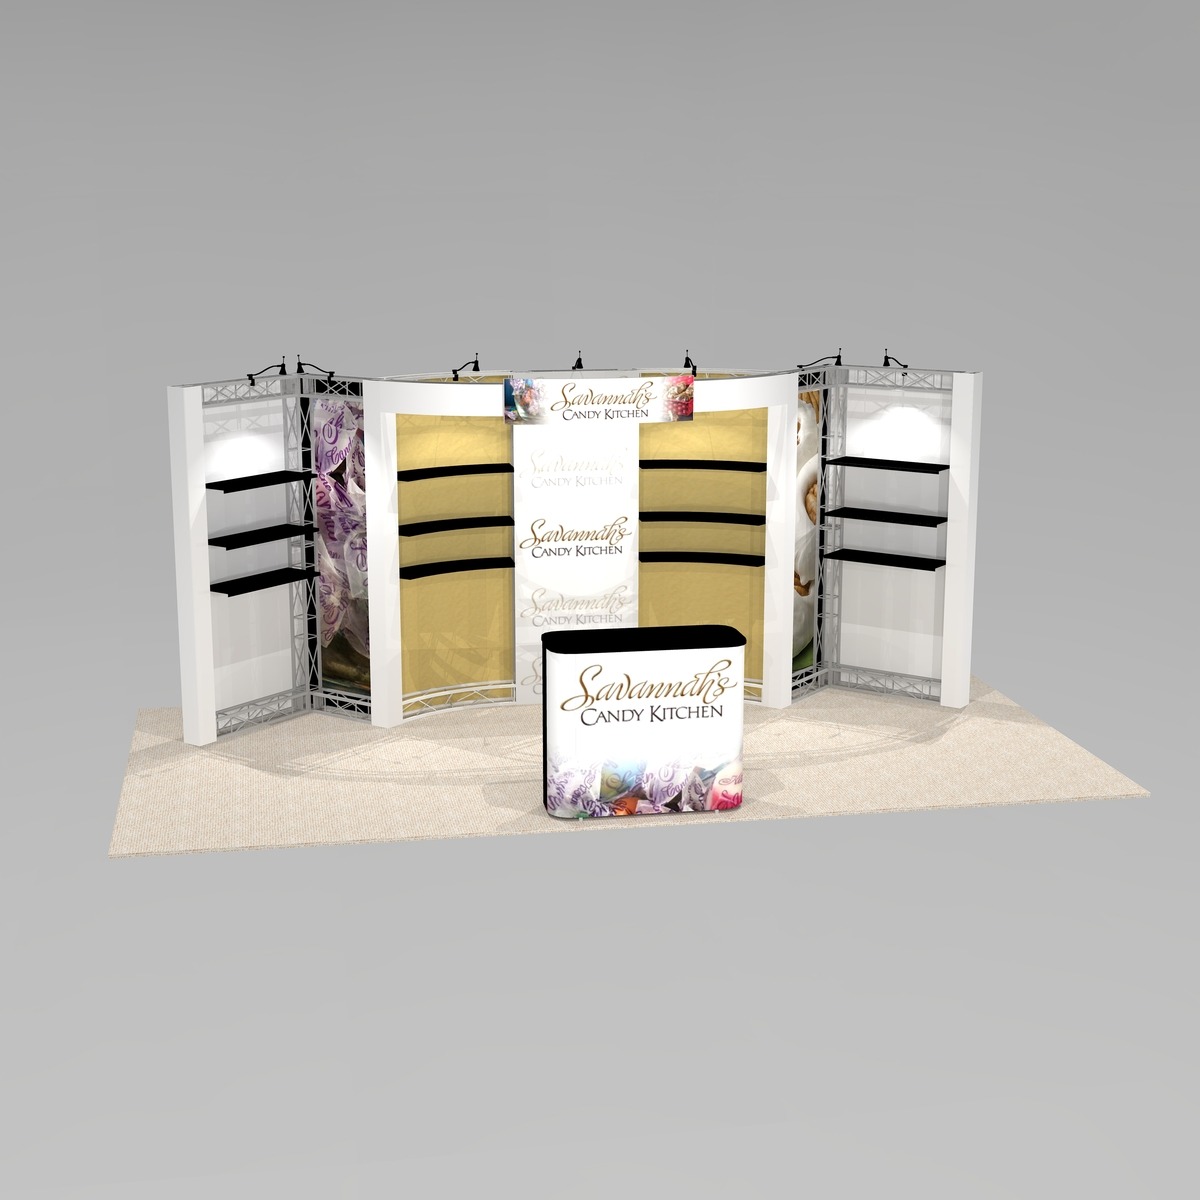 Trade show exhibit design BAY1020 has extensive shelving and great lighting - Graphic Package B